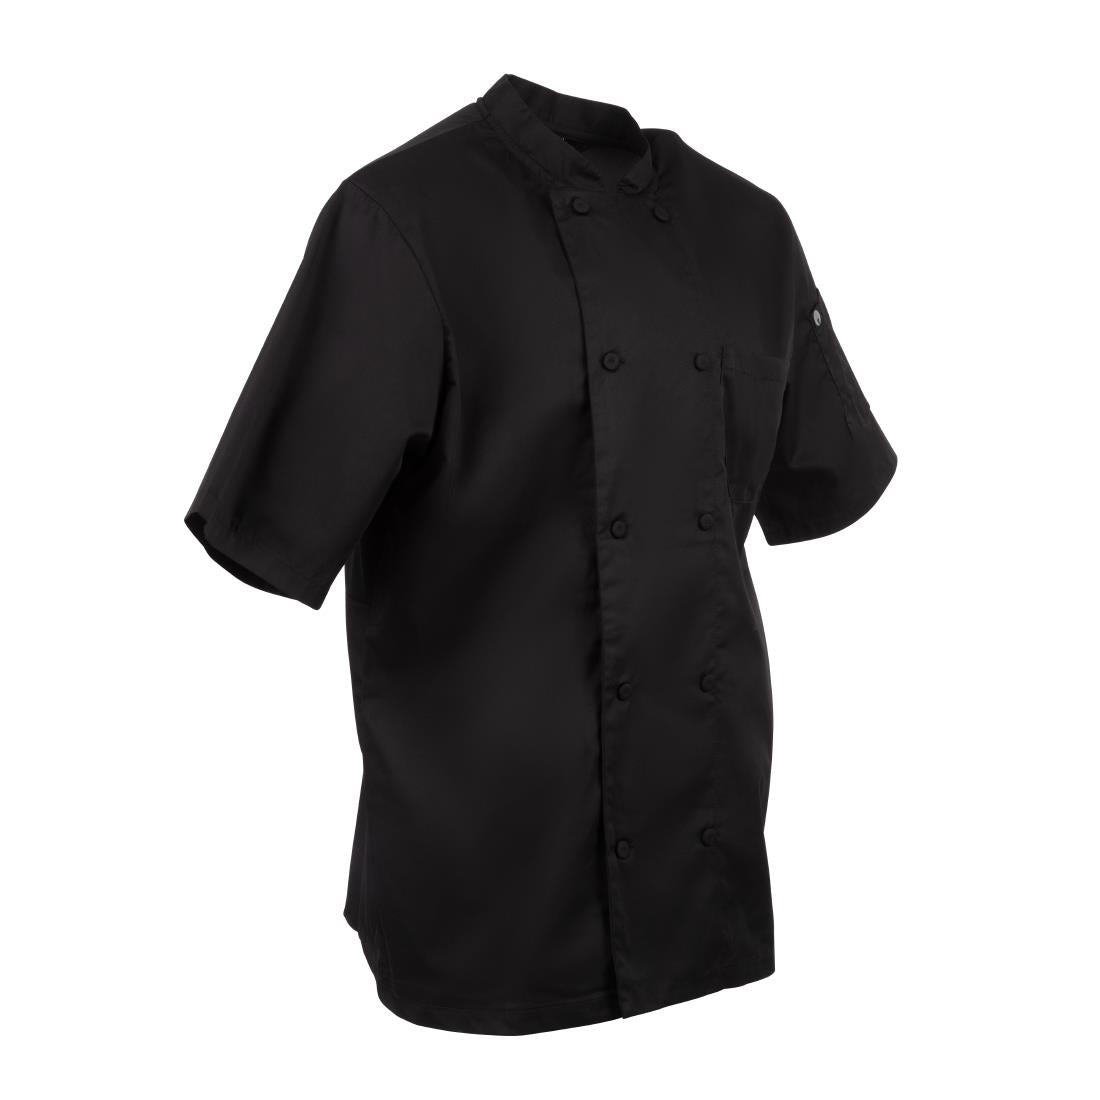 Chef Works Montreal Cool Vent Unisex Chefs Jacket Black/White JD Catering Equipment Solutions Ltd